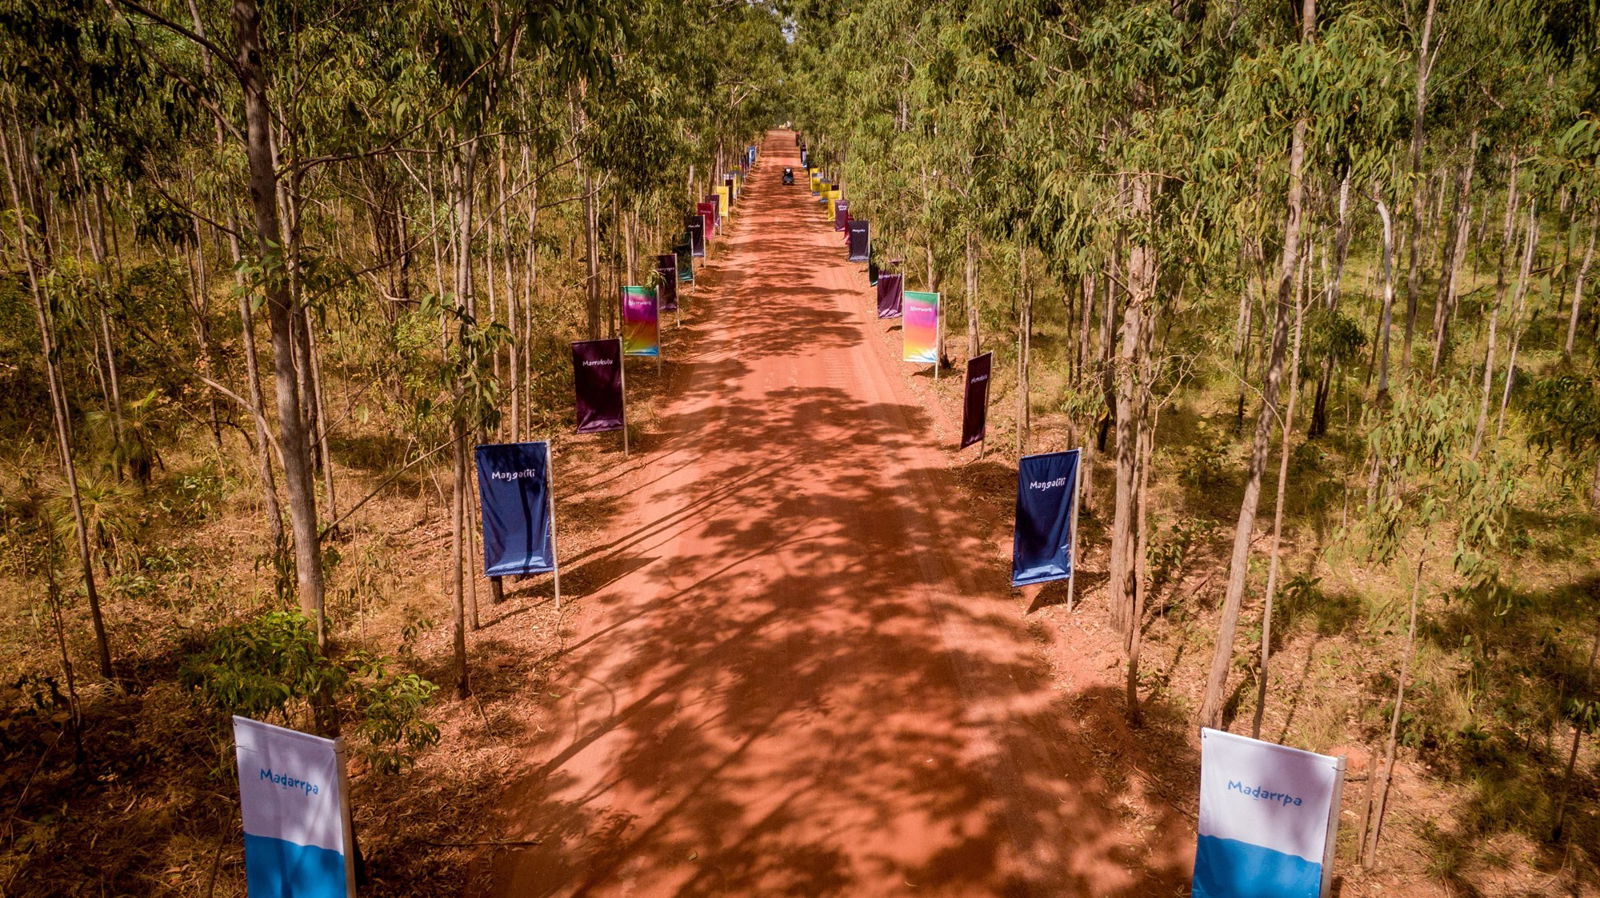 A wide shot showing a dirt driveway leading to the Garma Festival.